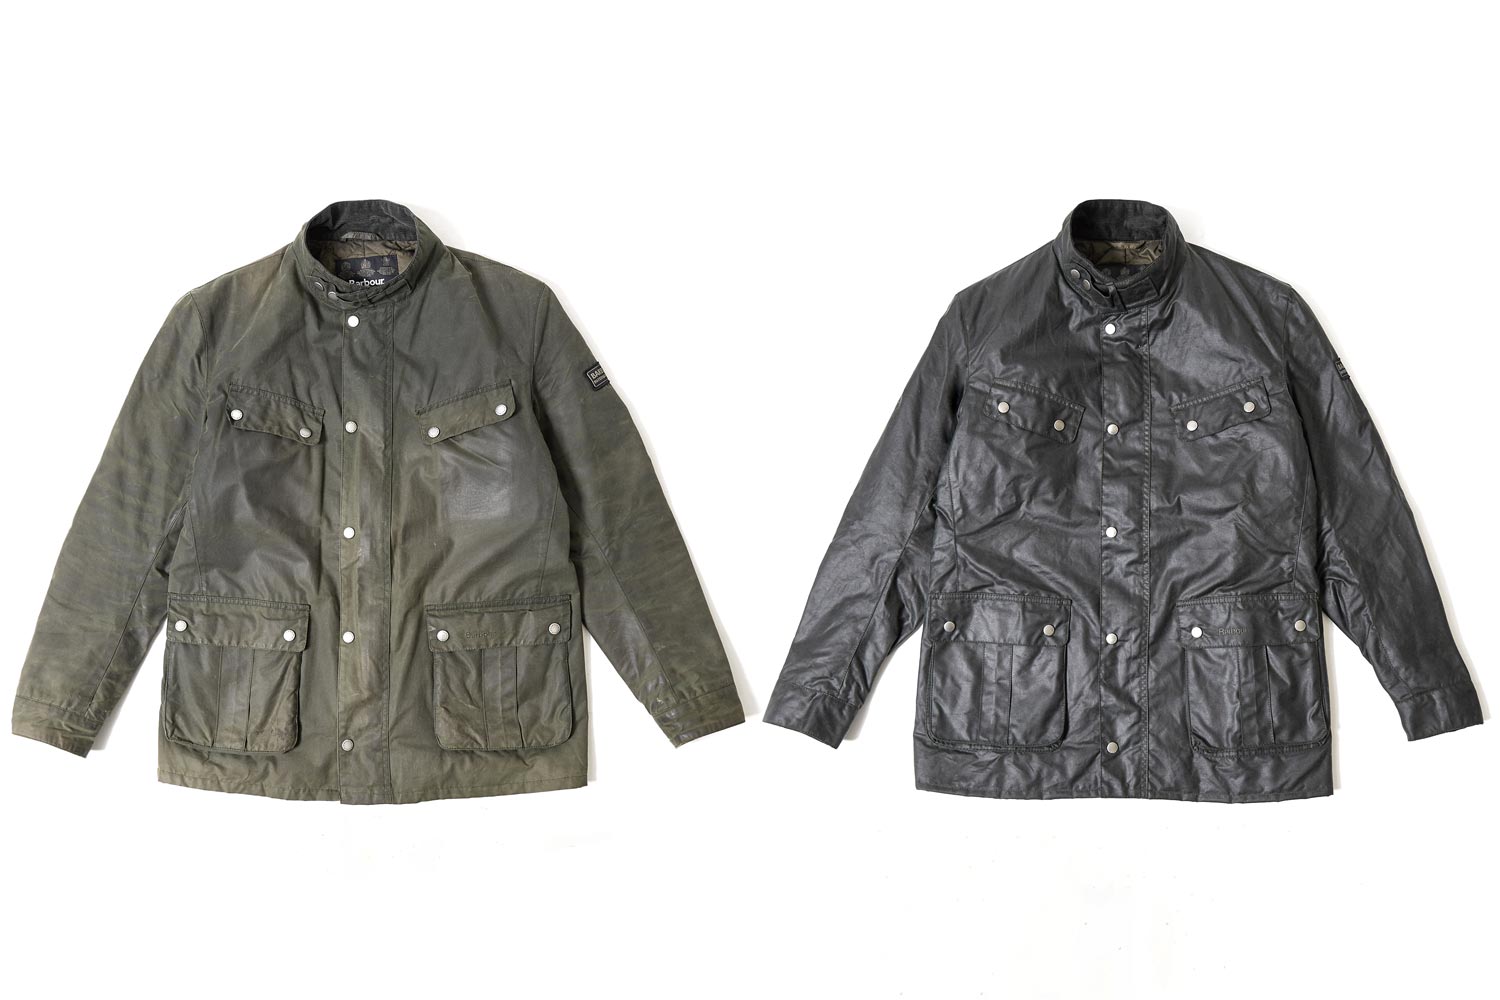 barbour jacket dry cleaning